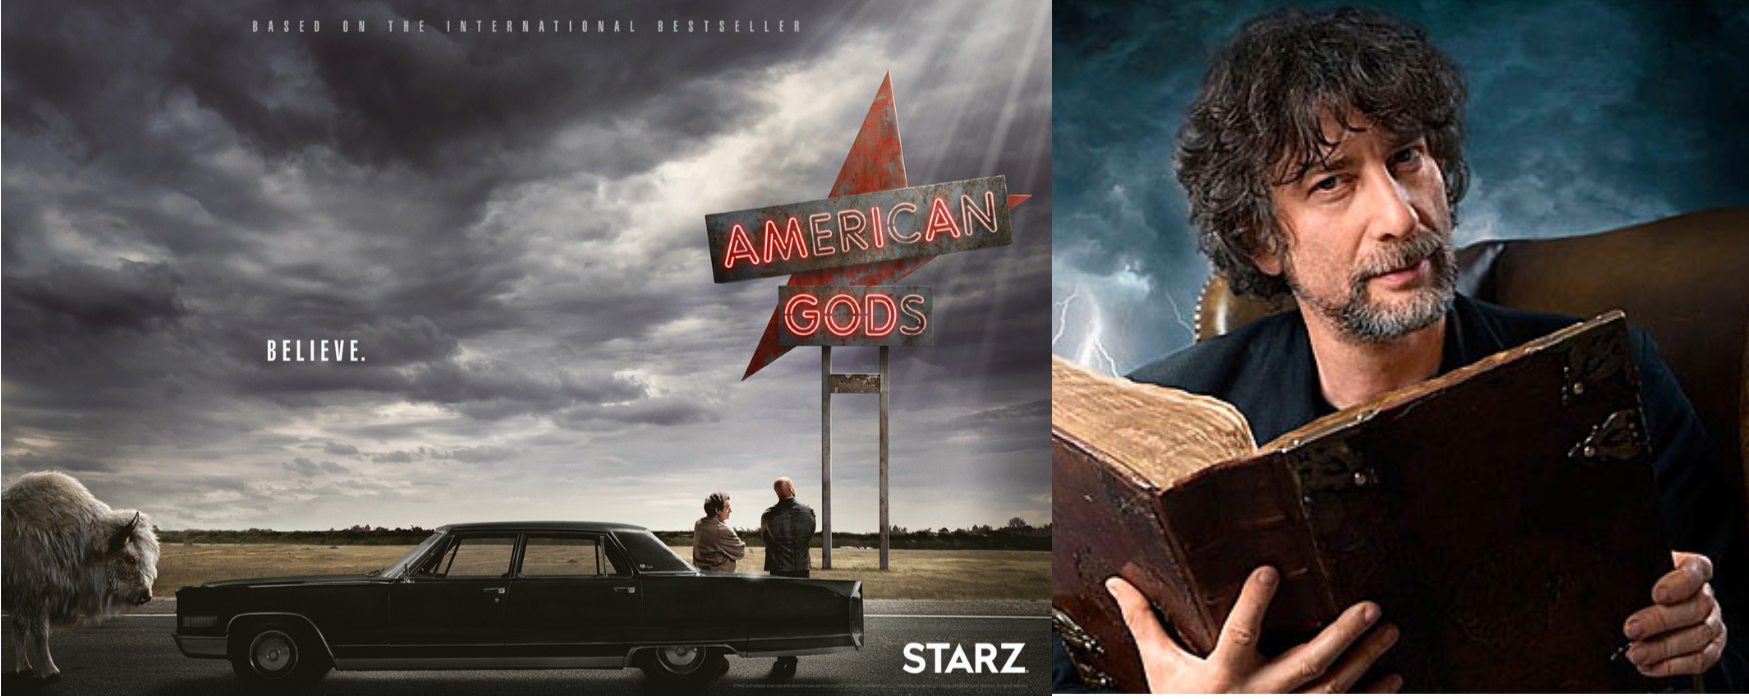 Neil Gaiman's 'American Gods' Series Transforms Into Gaming Content